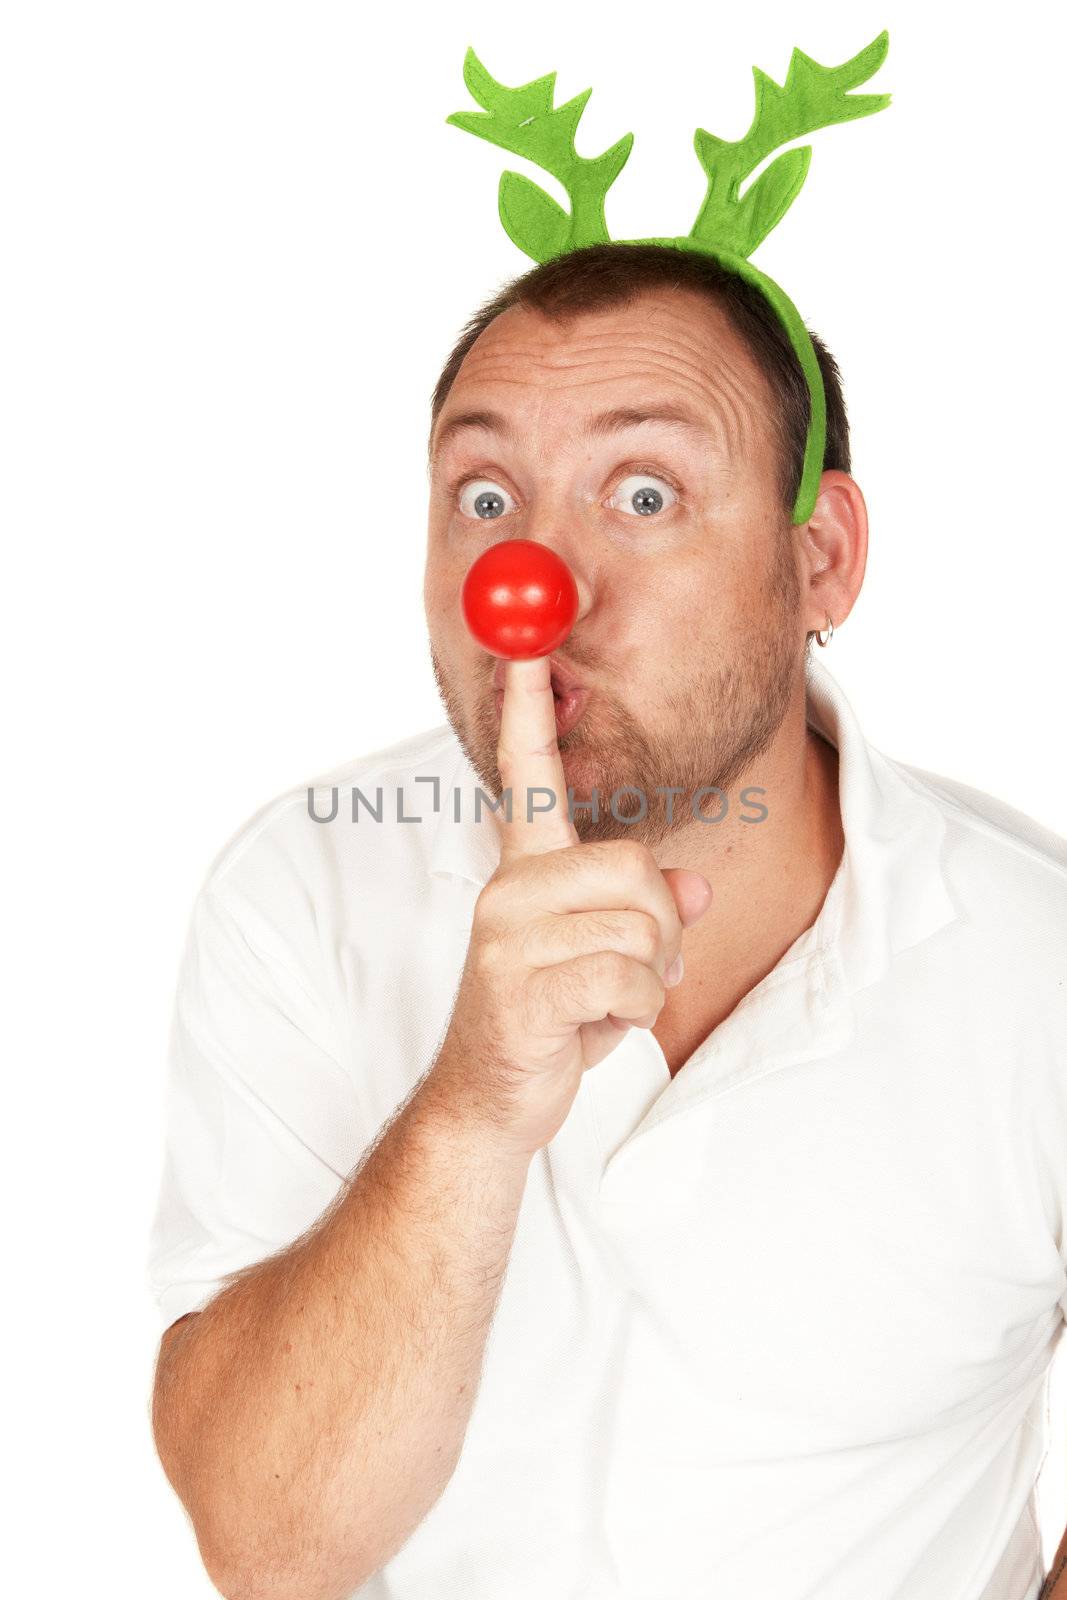 Handsome adult Caucasian man with green reindeer horns and red nose